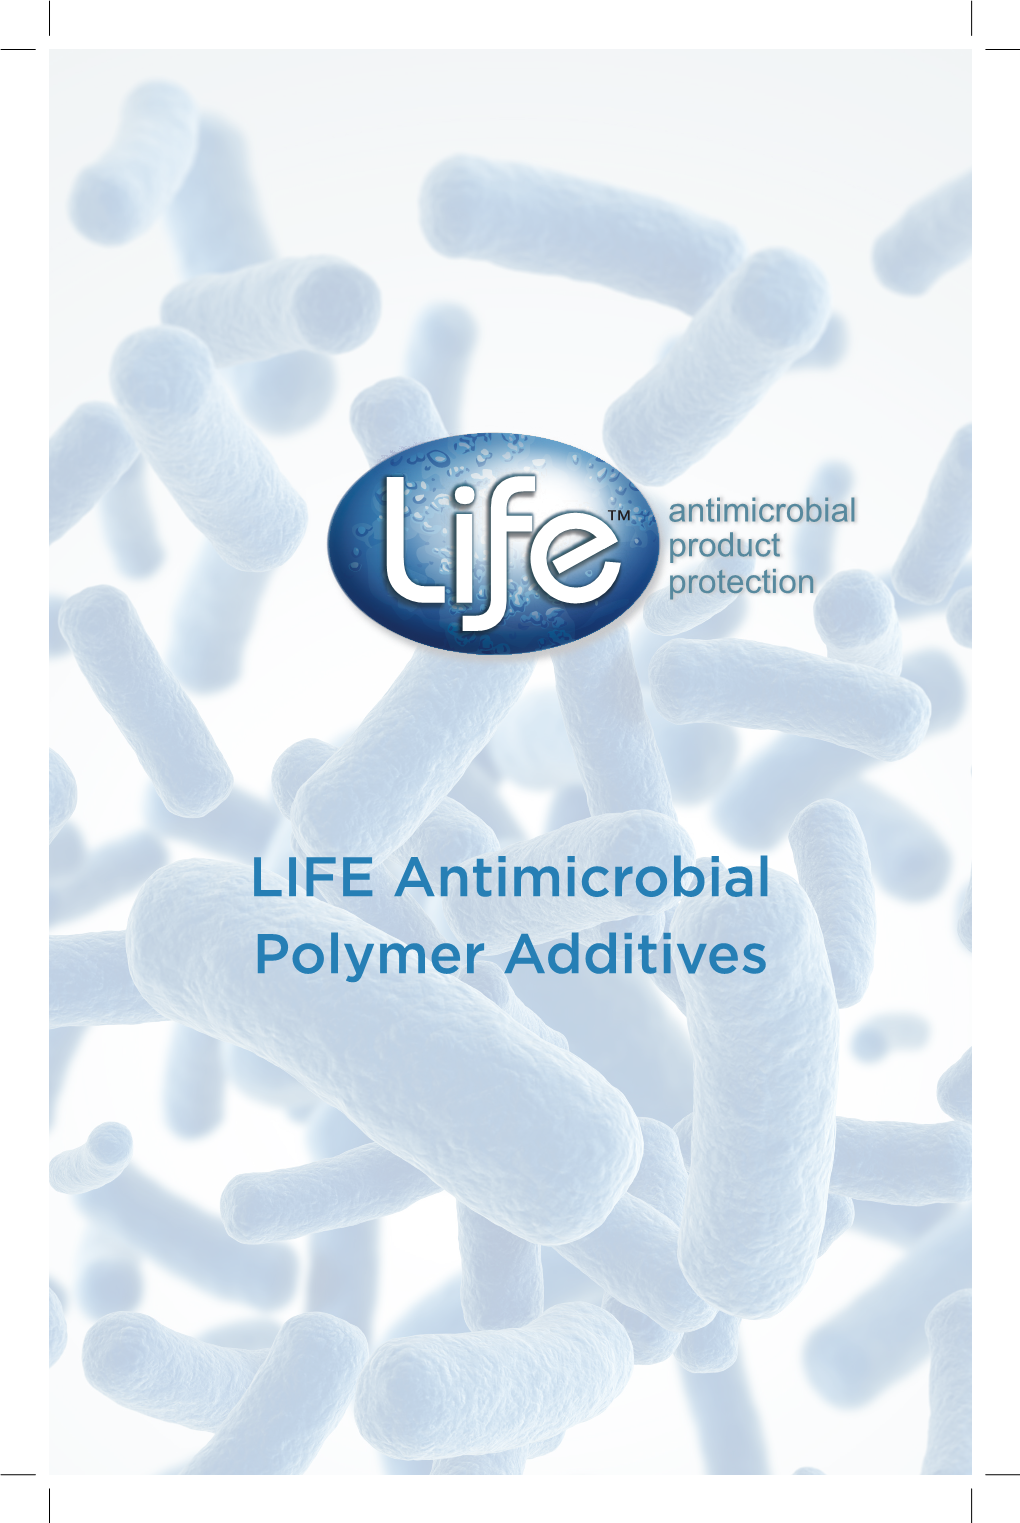 LIFE Antimicrobial Polymer Additives